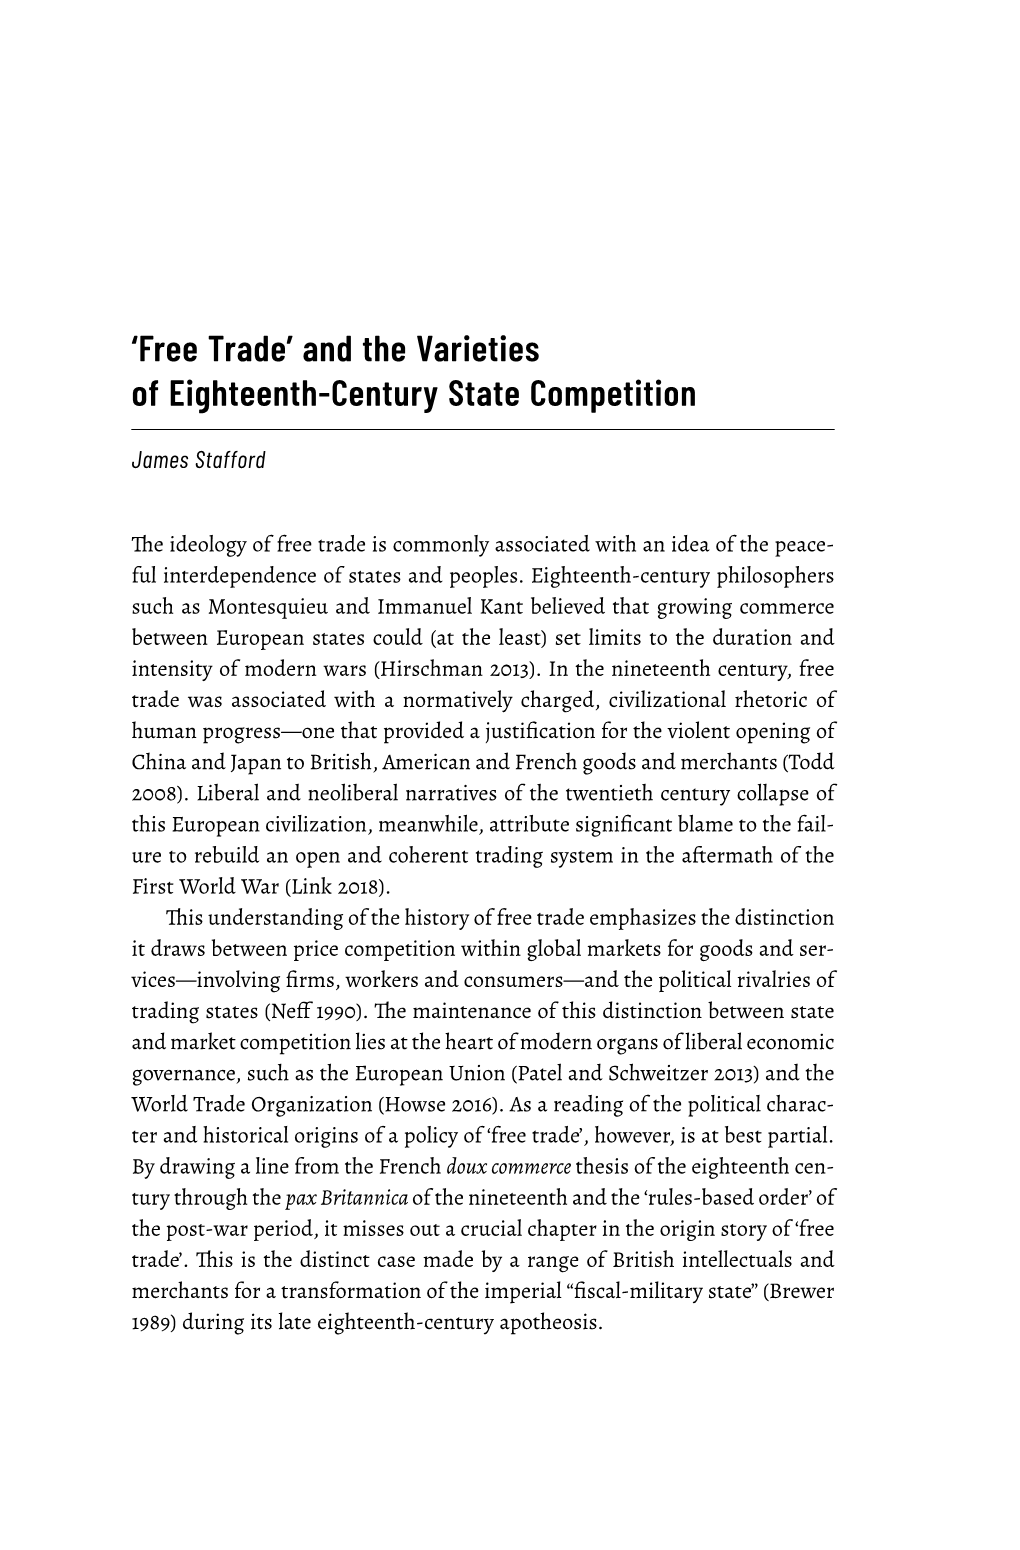 'Free Trade' and the Varieties of Eighteenth-Century State Competition